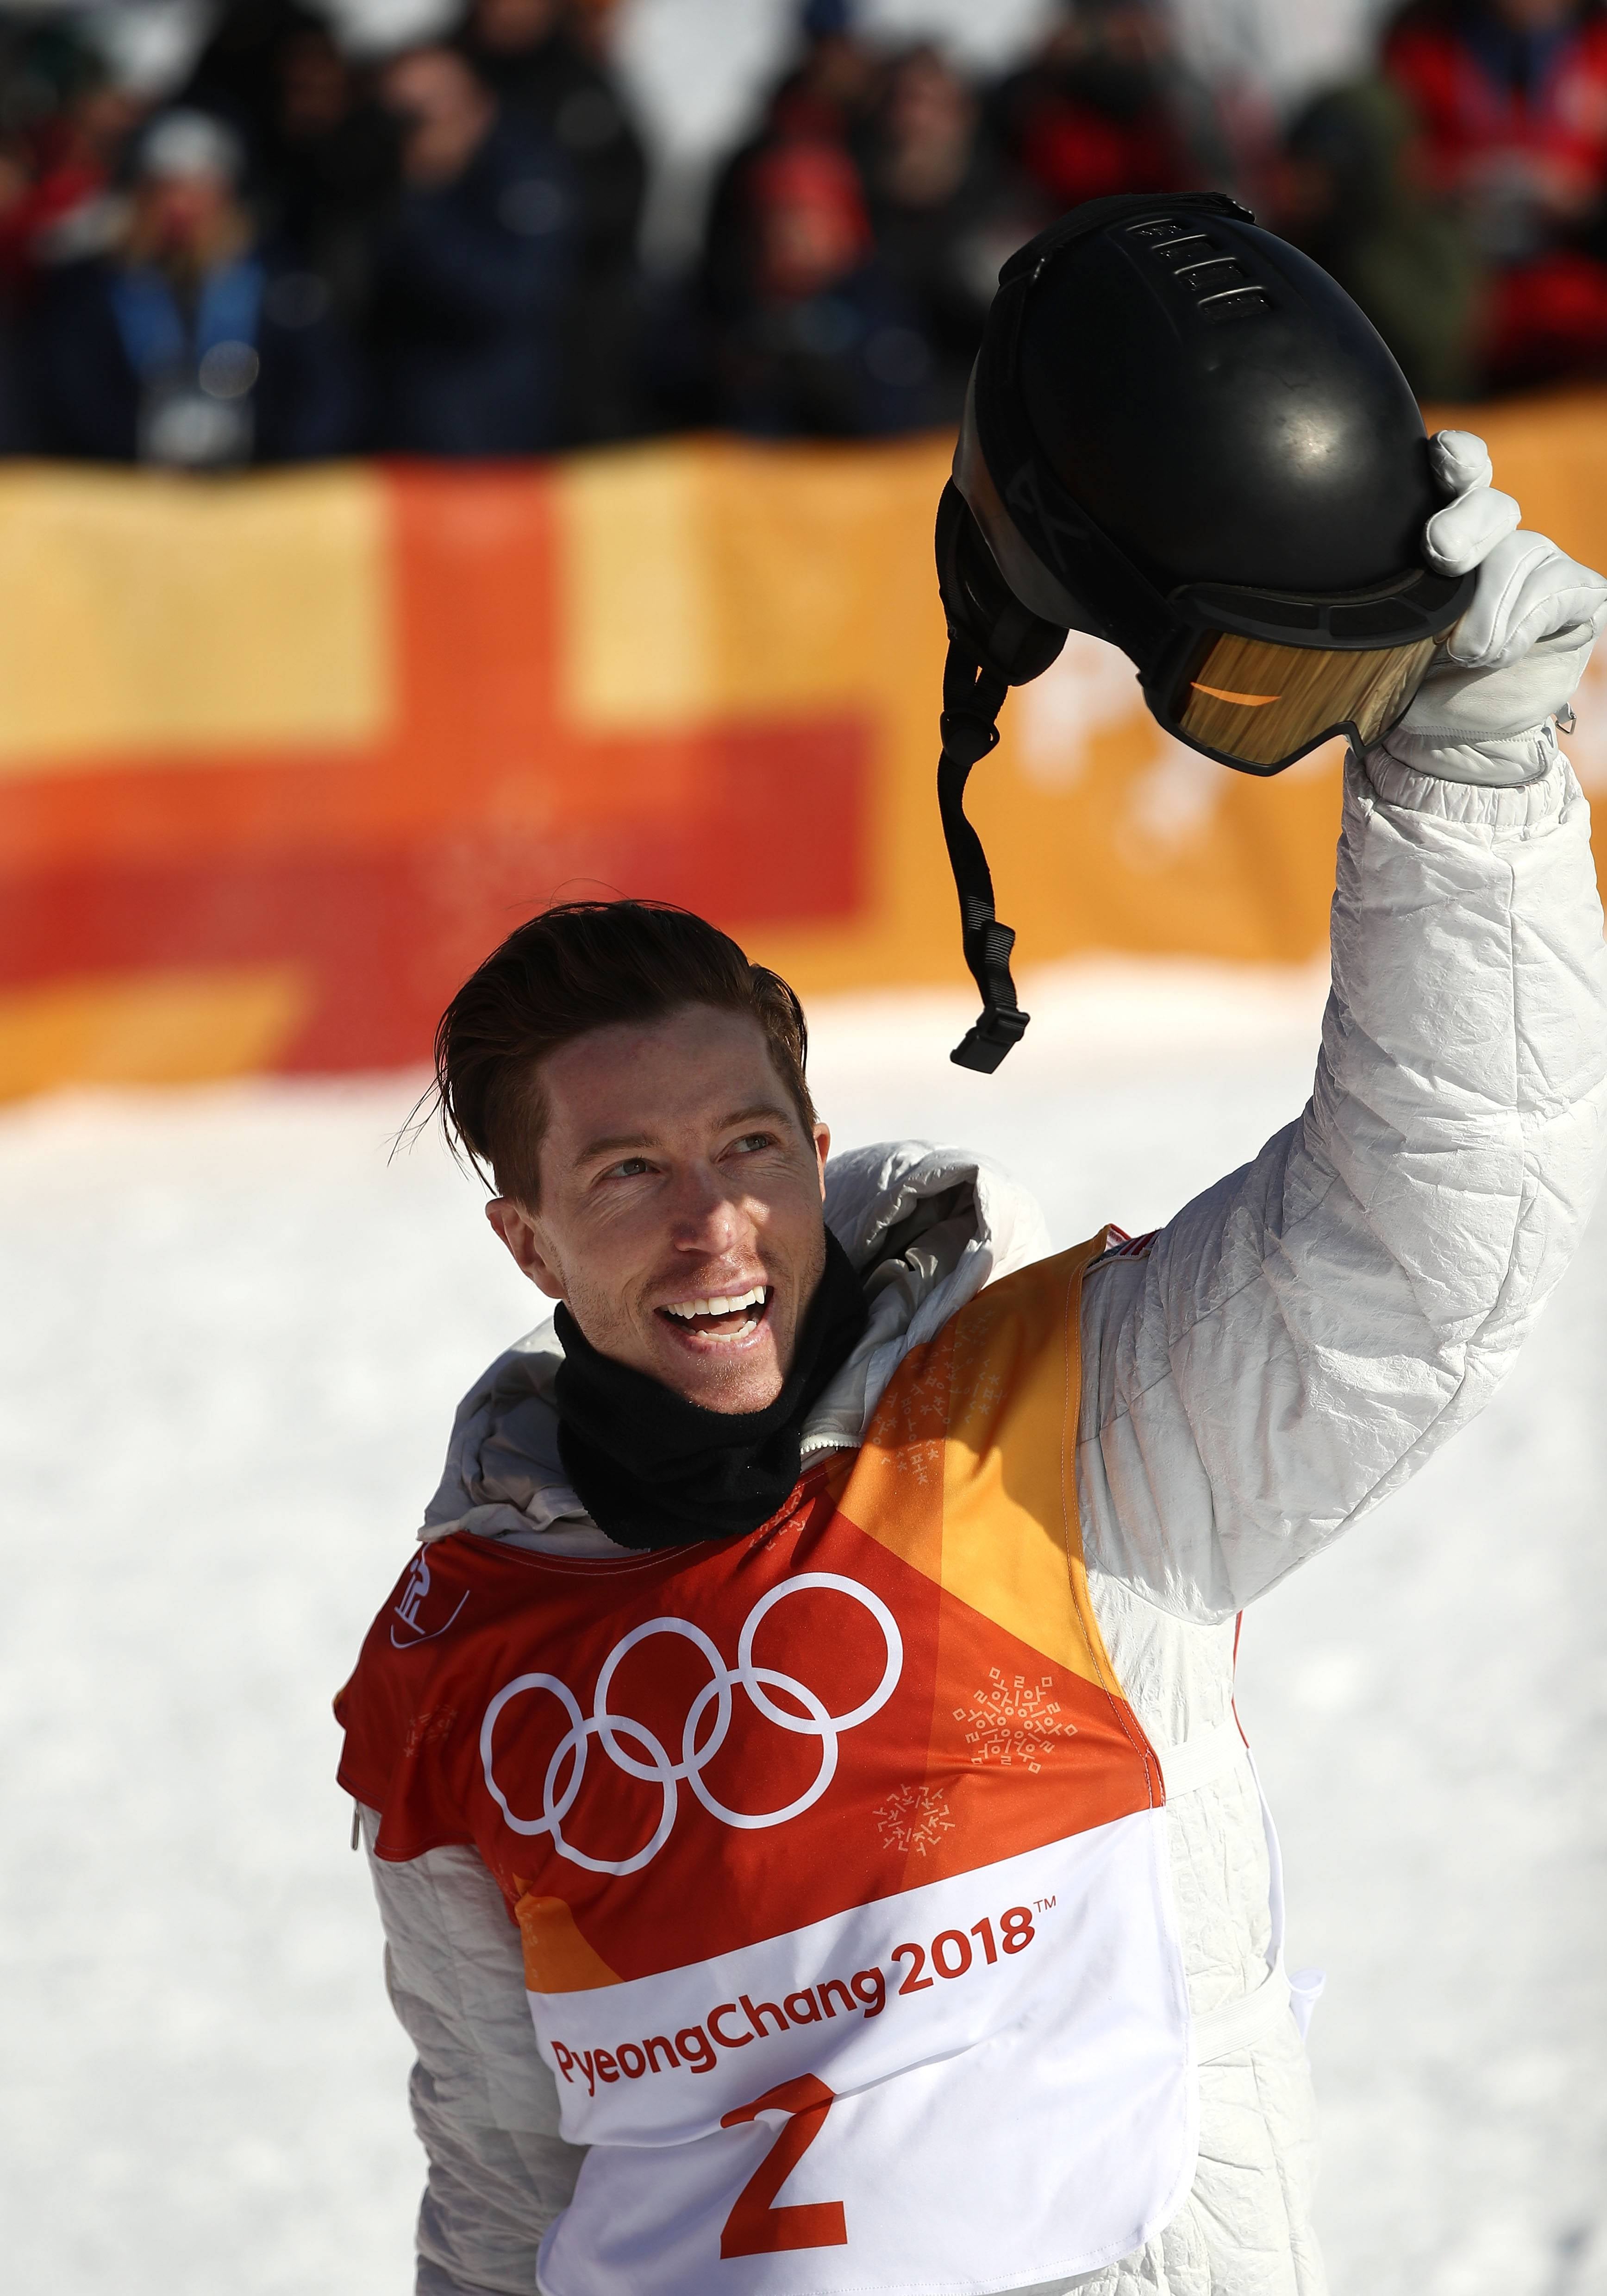 Winter Olympics: Shaun White wins third Olympic gold after